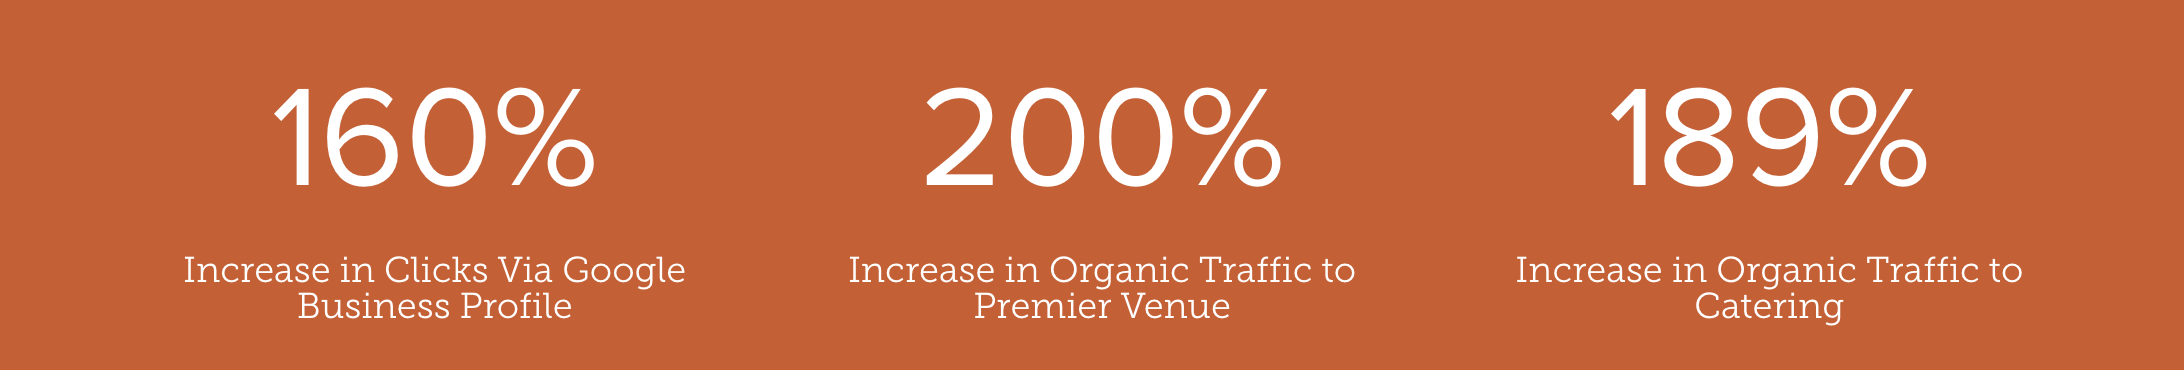 Screenshot of local SEO results for Venue Restaurant & Lounge with 160% increase in clicks via Google Business Profile, 200% increase in organic traffic to premier venue, and 189% increase in organic traffic to catering